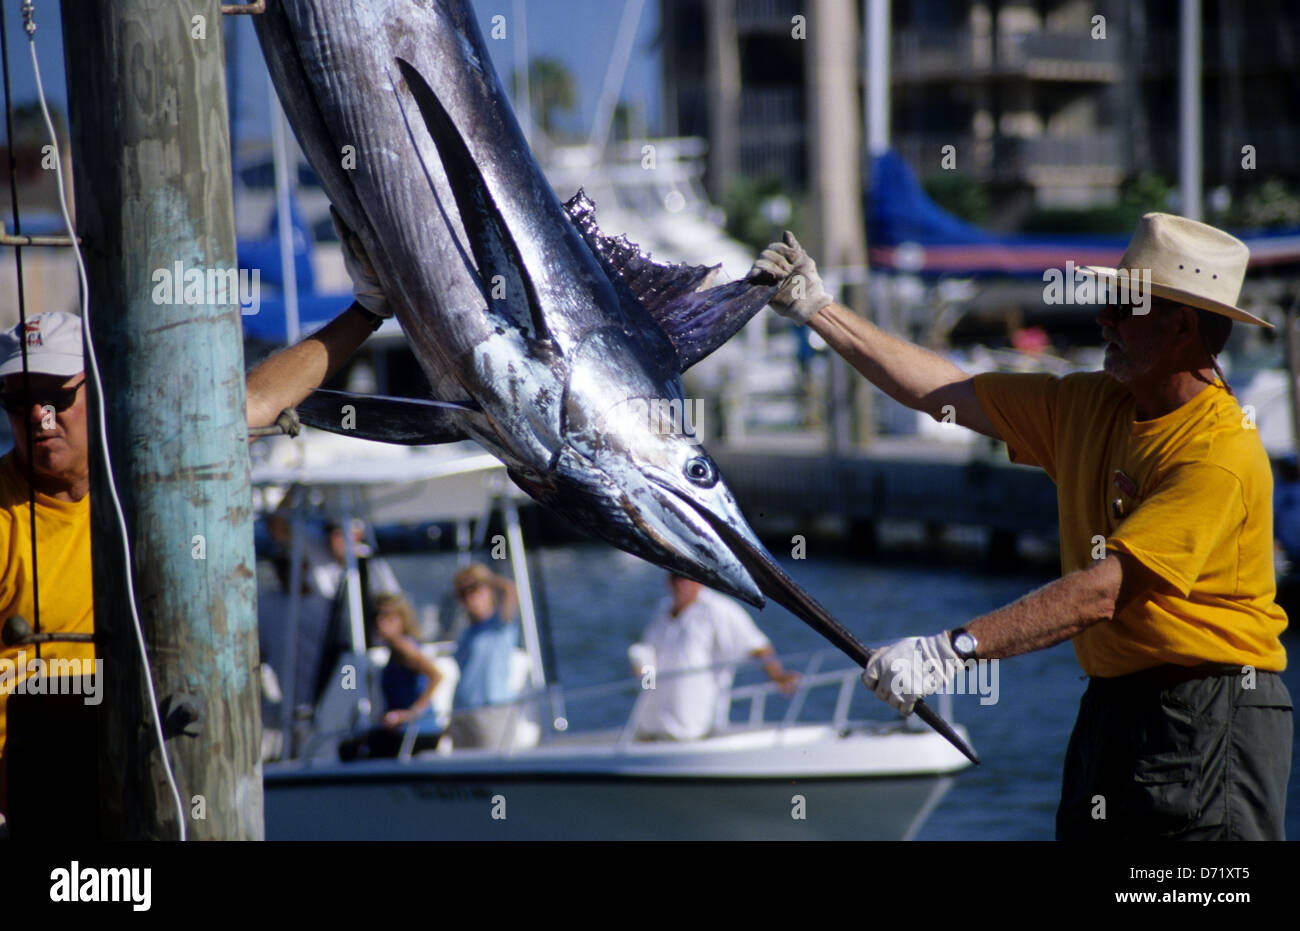 An Atlantic blue marlin (Makaira nigricans) is weighed and measured during a tournament in Port Aransas Texas USA Stock Photo